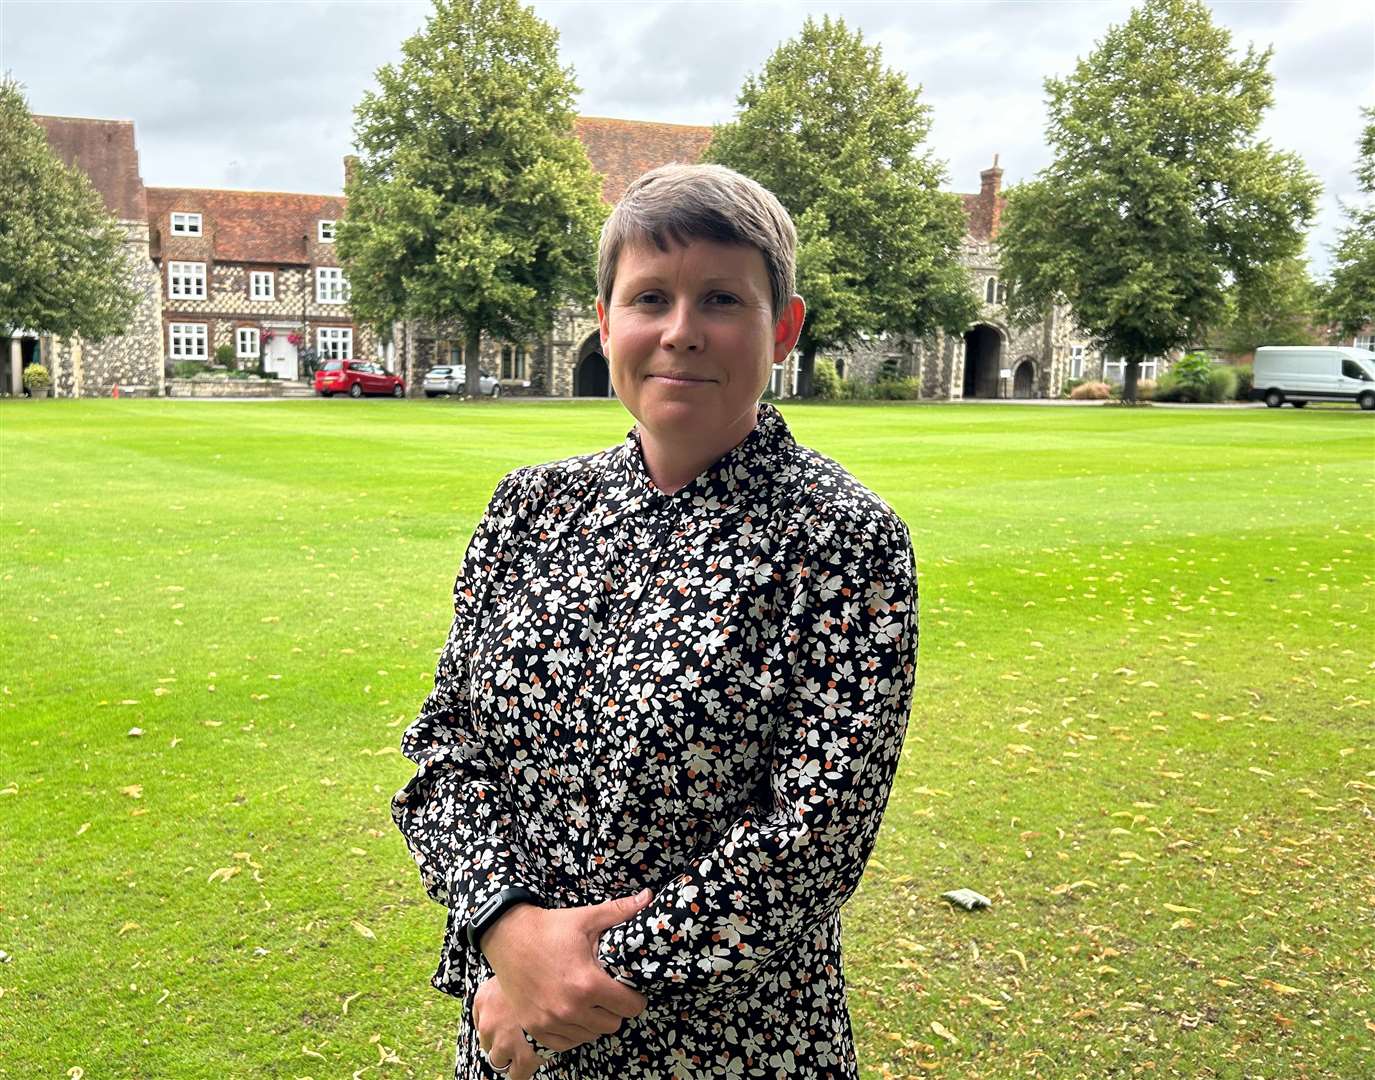 New King's School Canterbury head Jude Lowson has described her vision ahead of starting in September